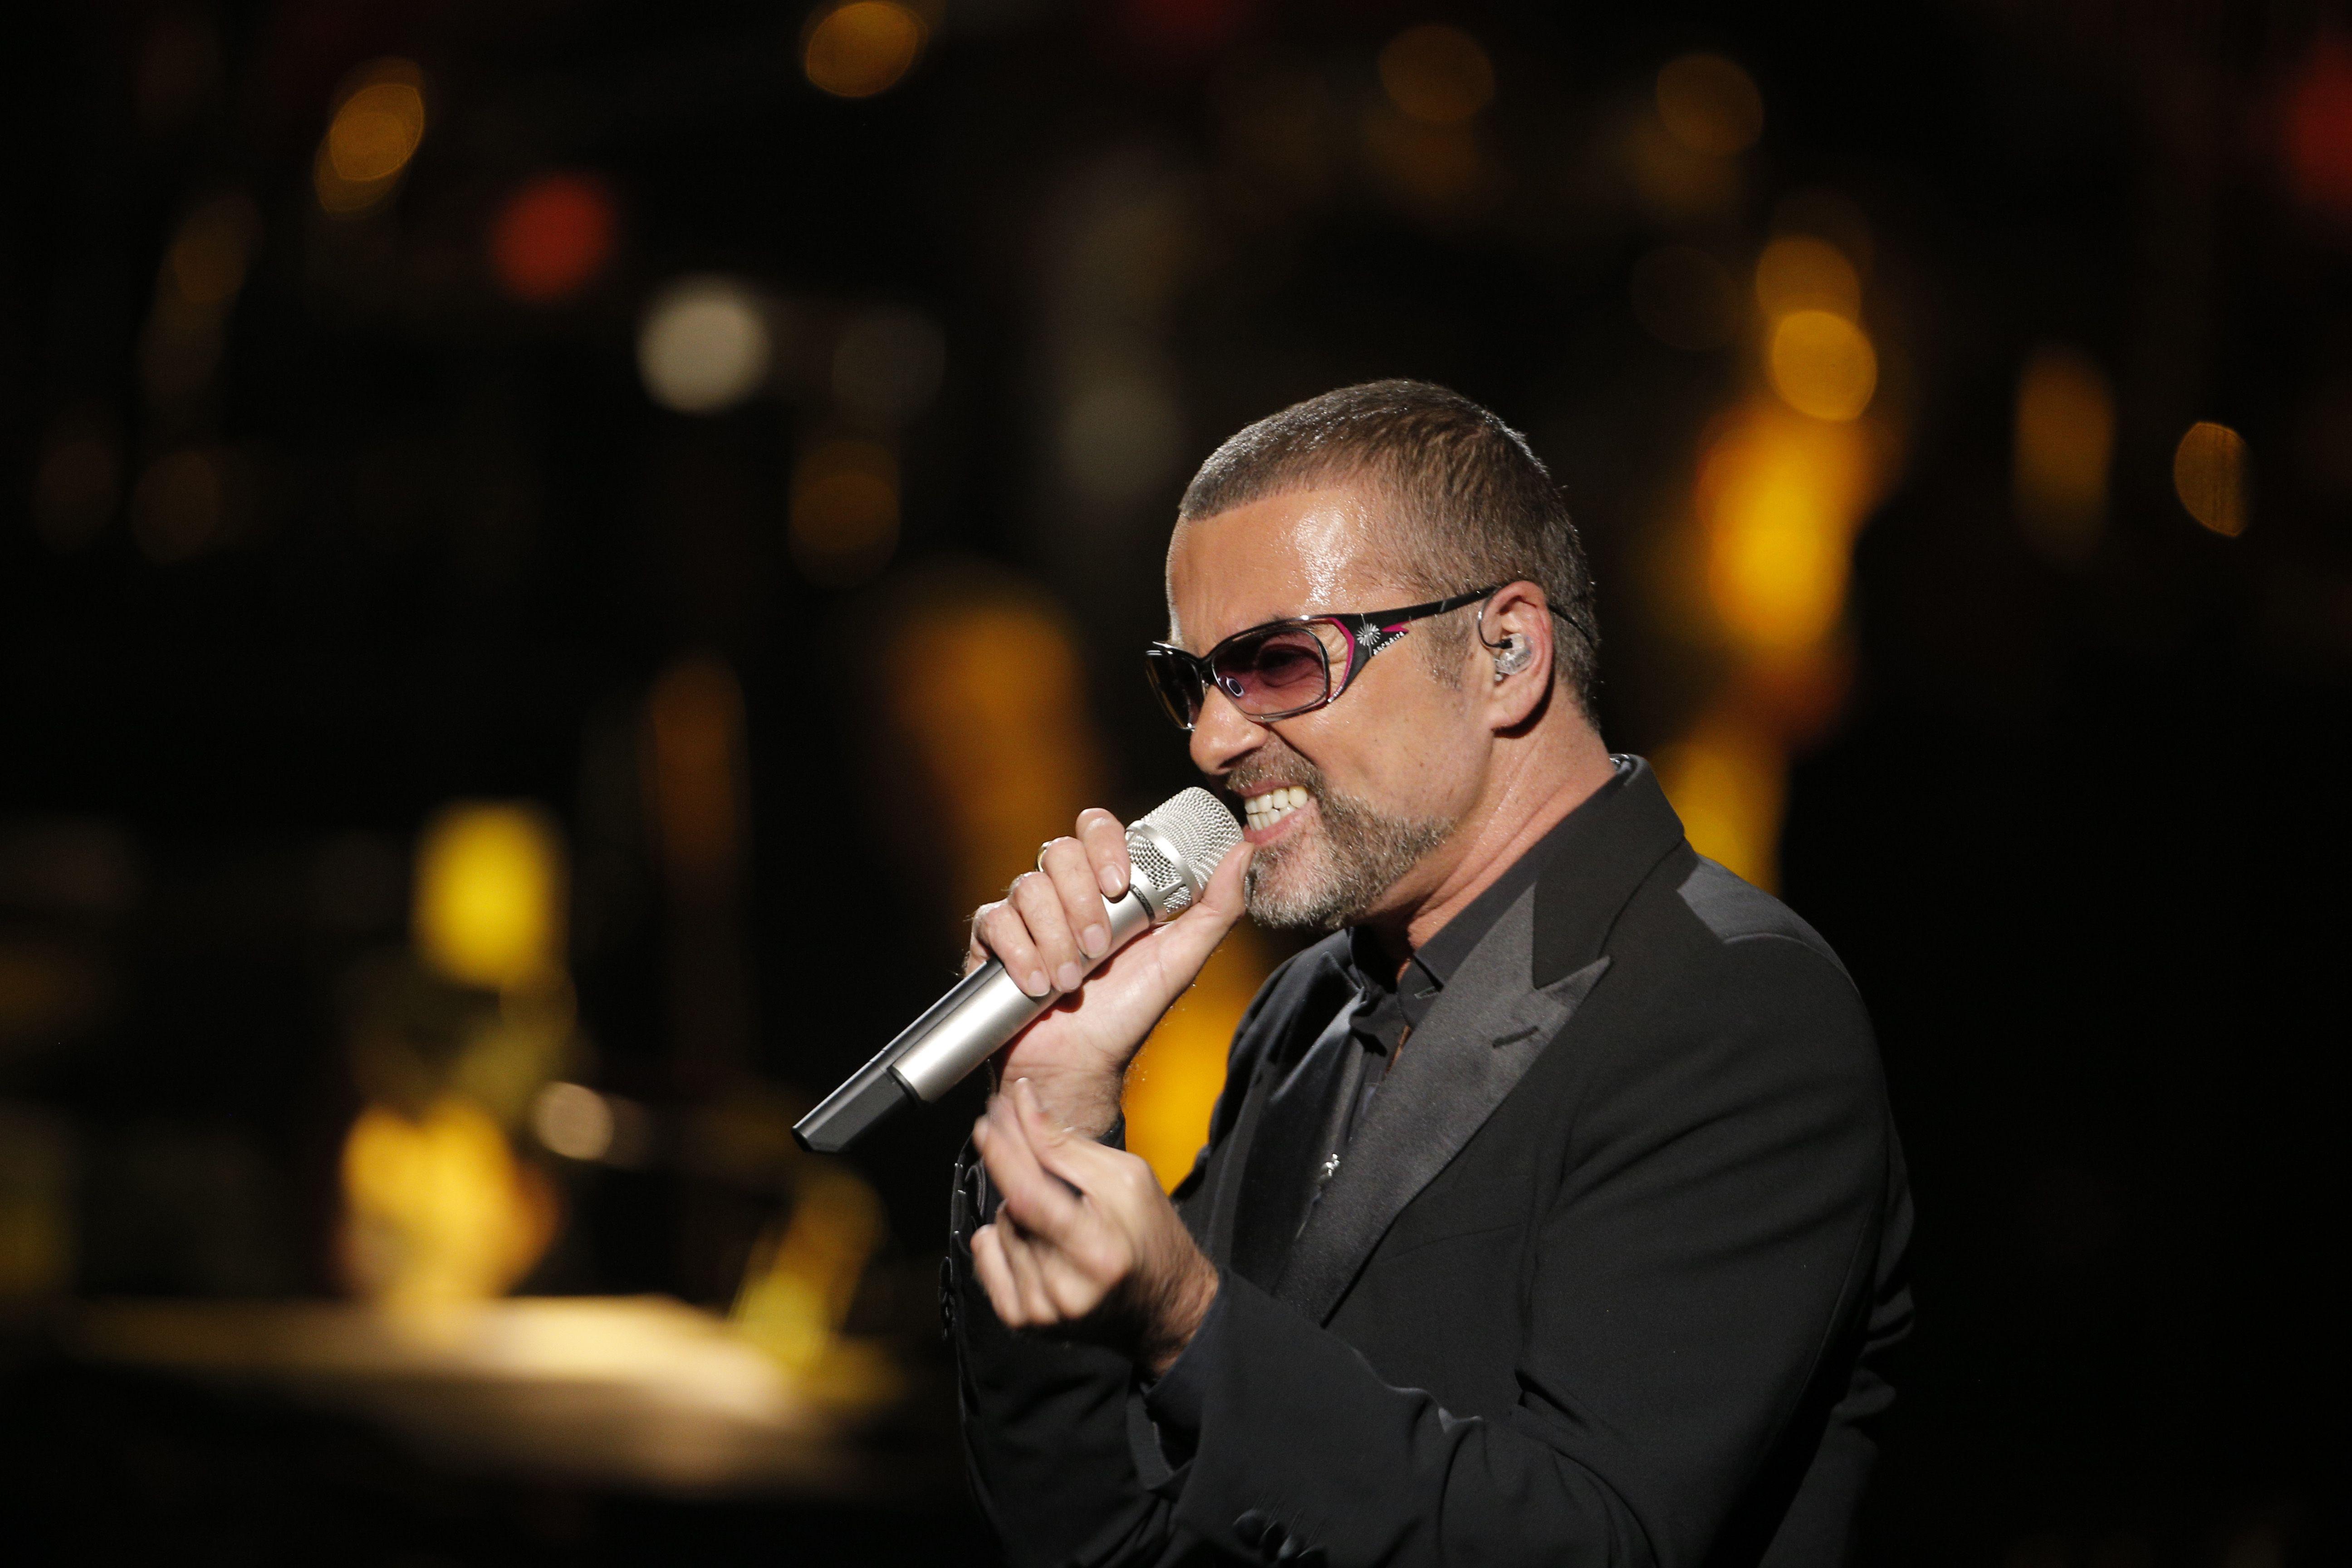 George Michael Wallpaper Image Photo Picture Background